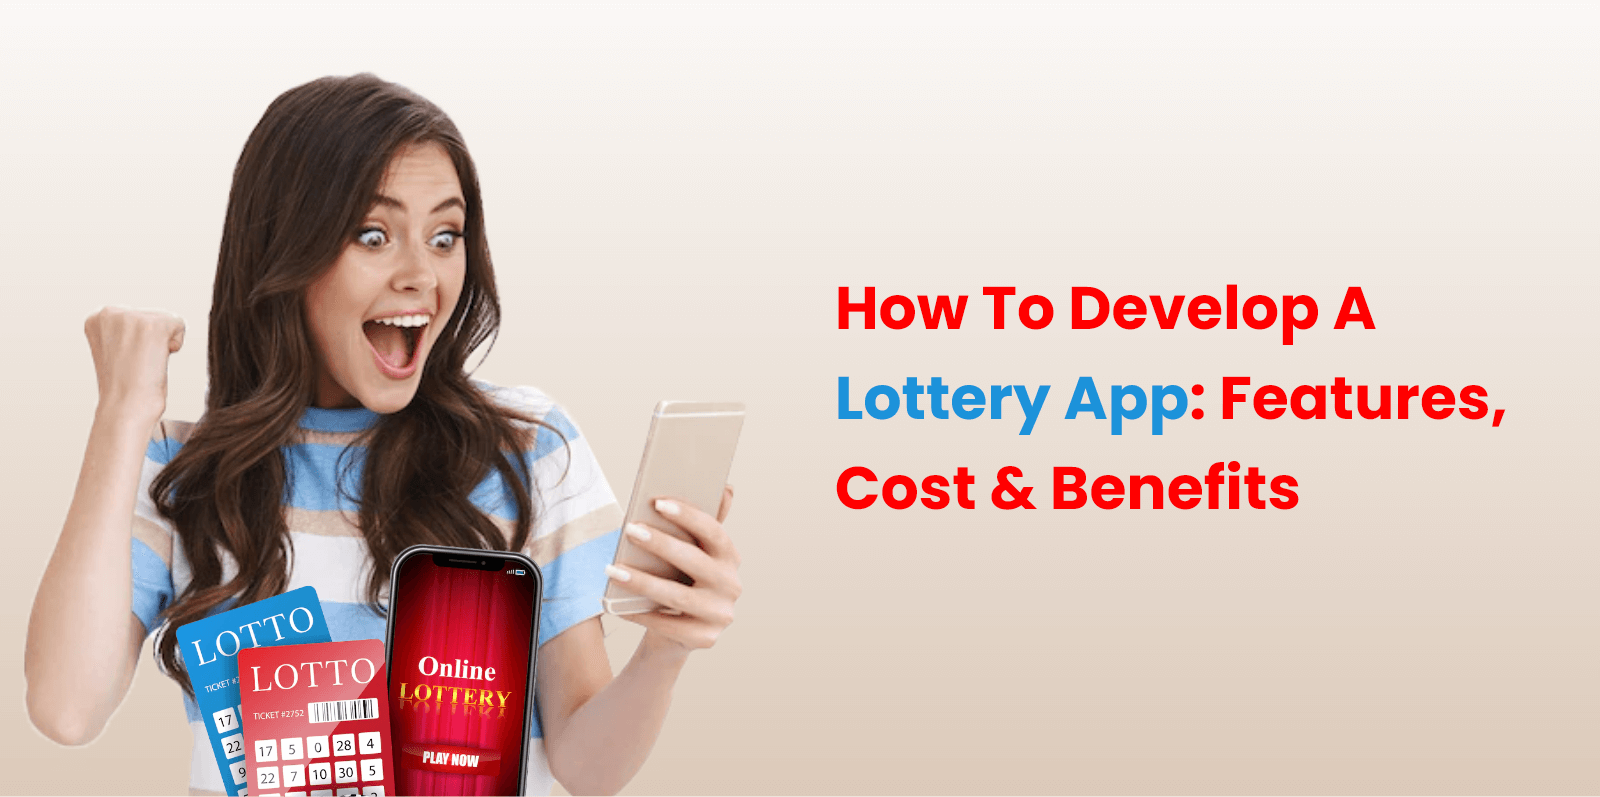 How To develop a lottery app?